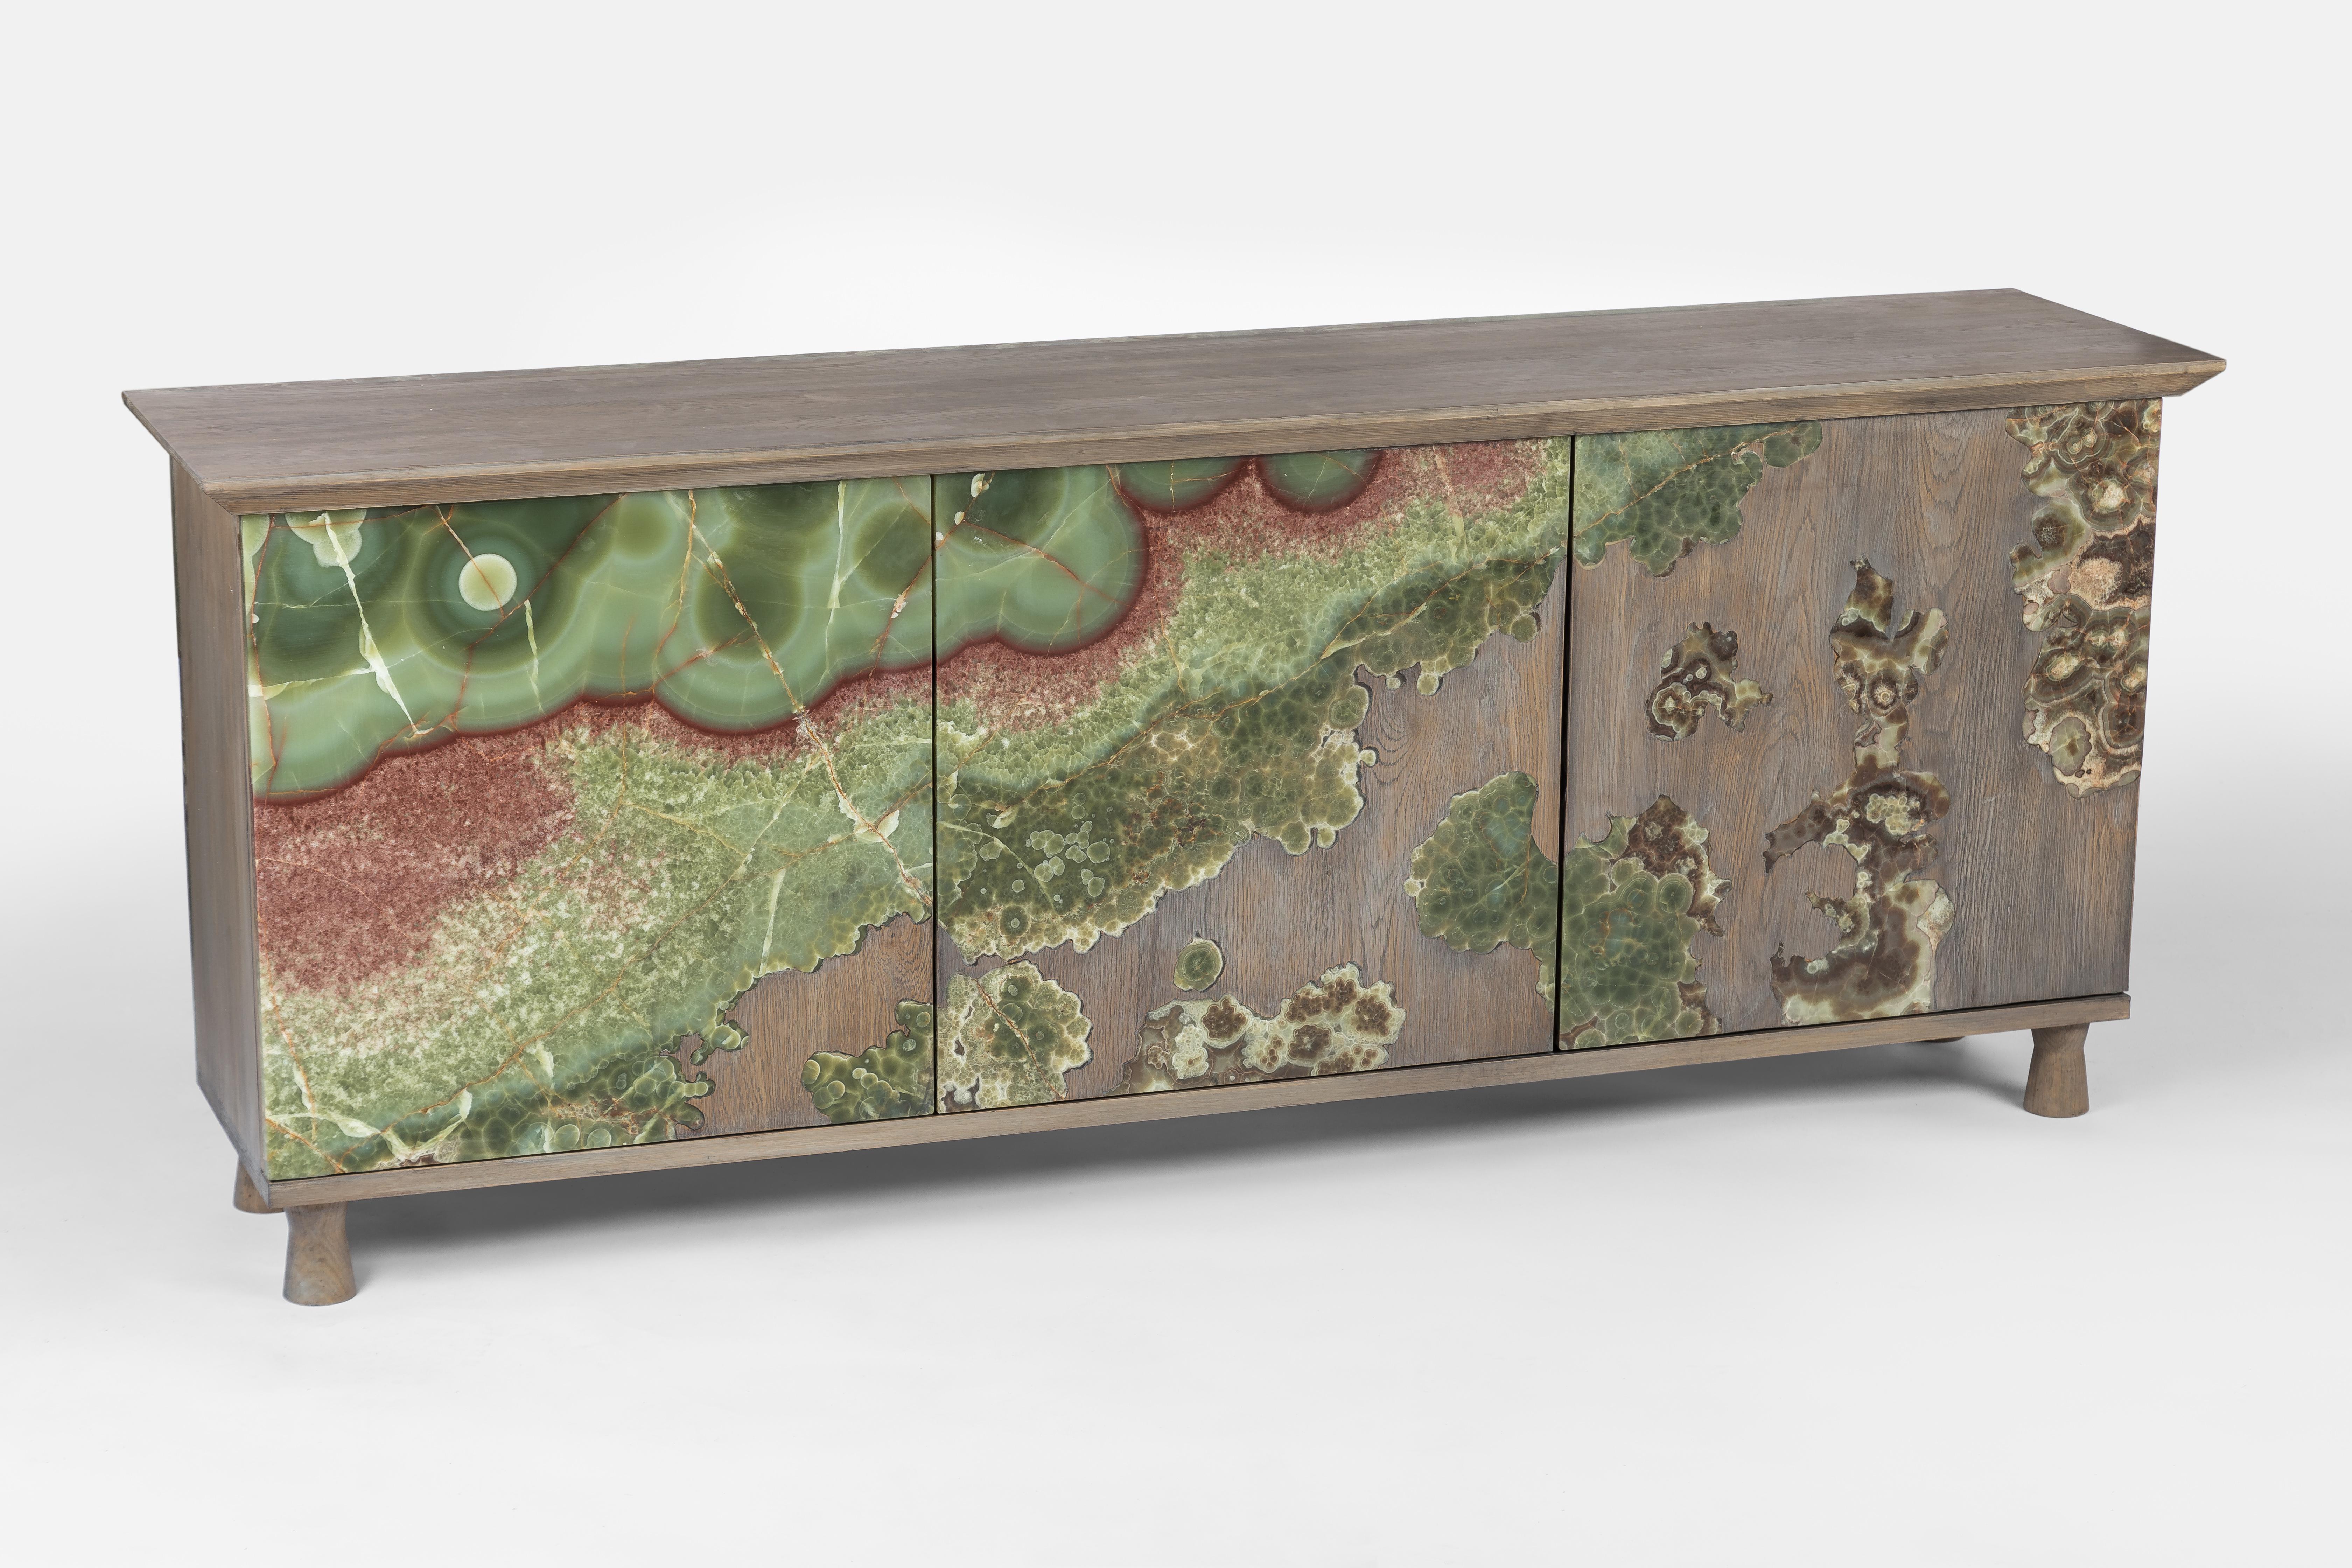 Unique onyx on oak nature cabinet sculpted by Francesco Perini 
Materials: Oak, onyx
Dimensions: W 187 x D 44 x H 75 cm

Following a creative path that grew out of the founding of a company, I Vassalletti, known the world over for its